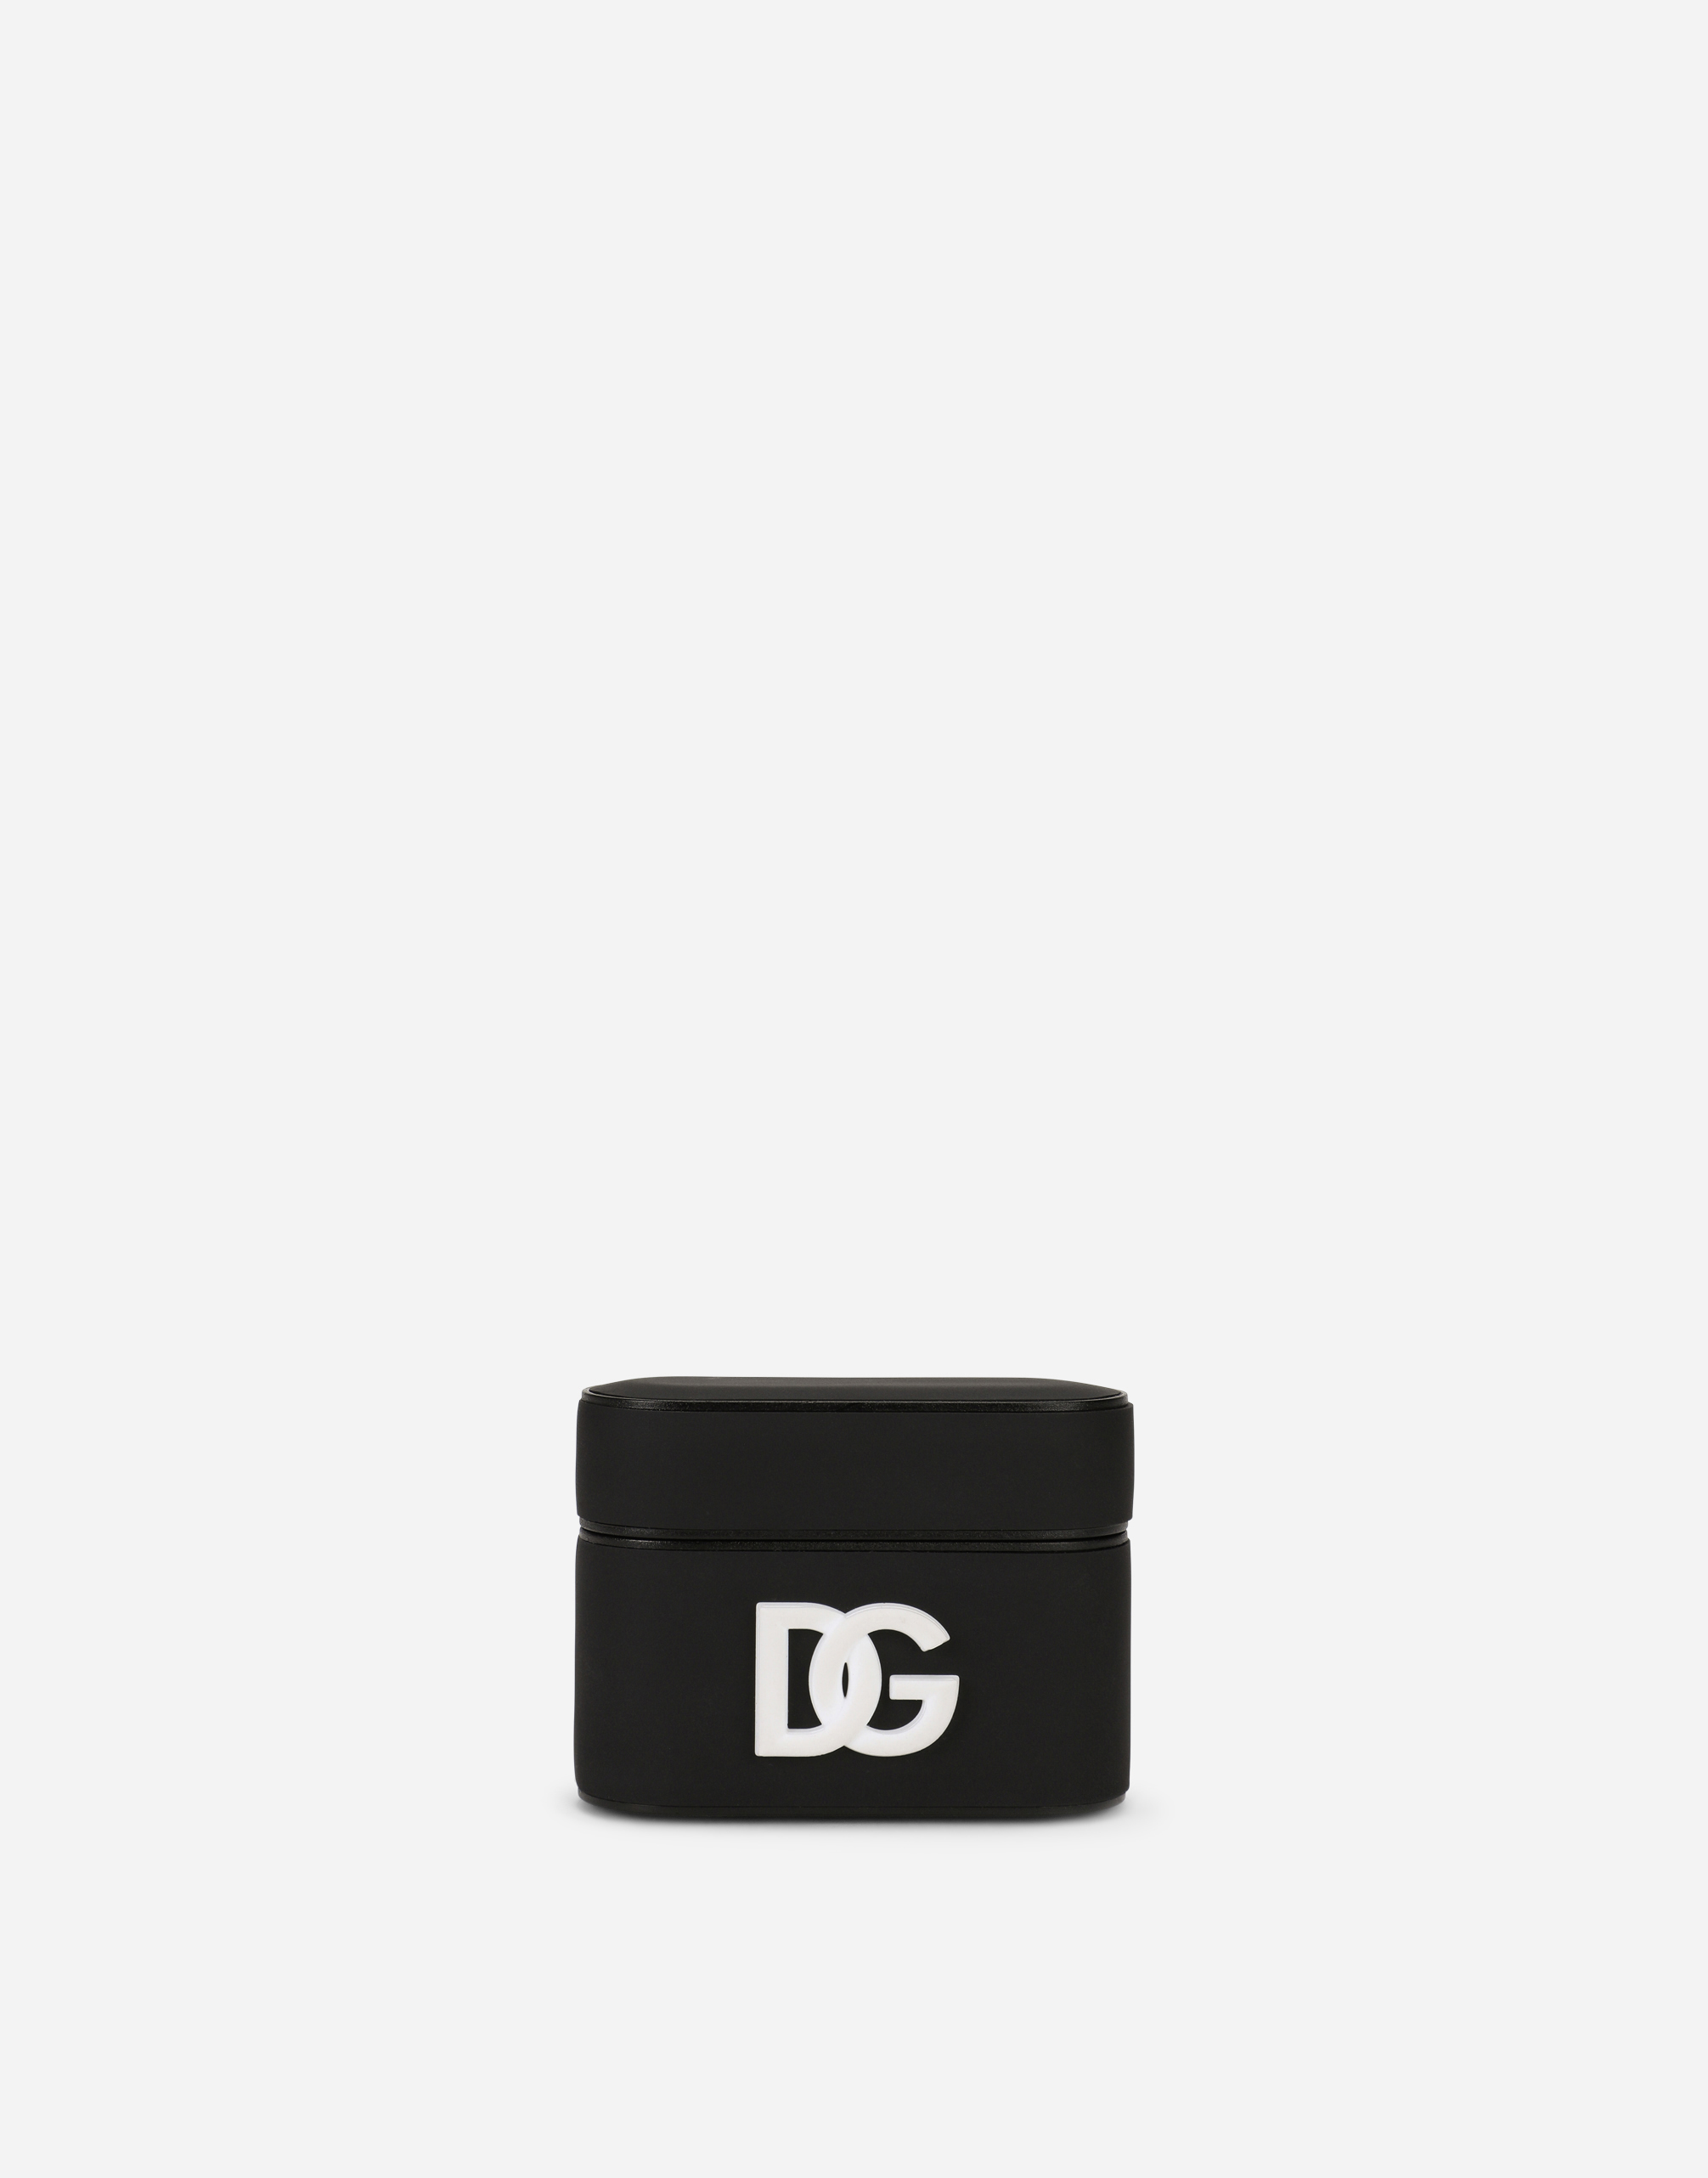 Rubber airpods pro case with DG logo in Black